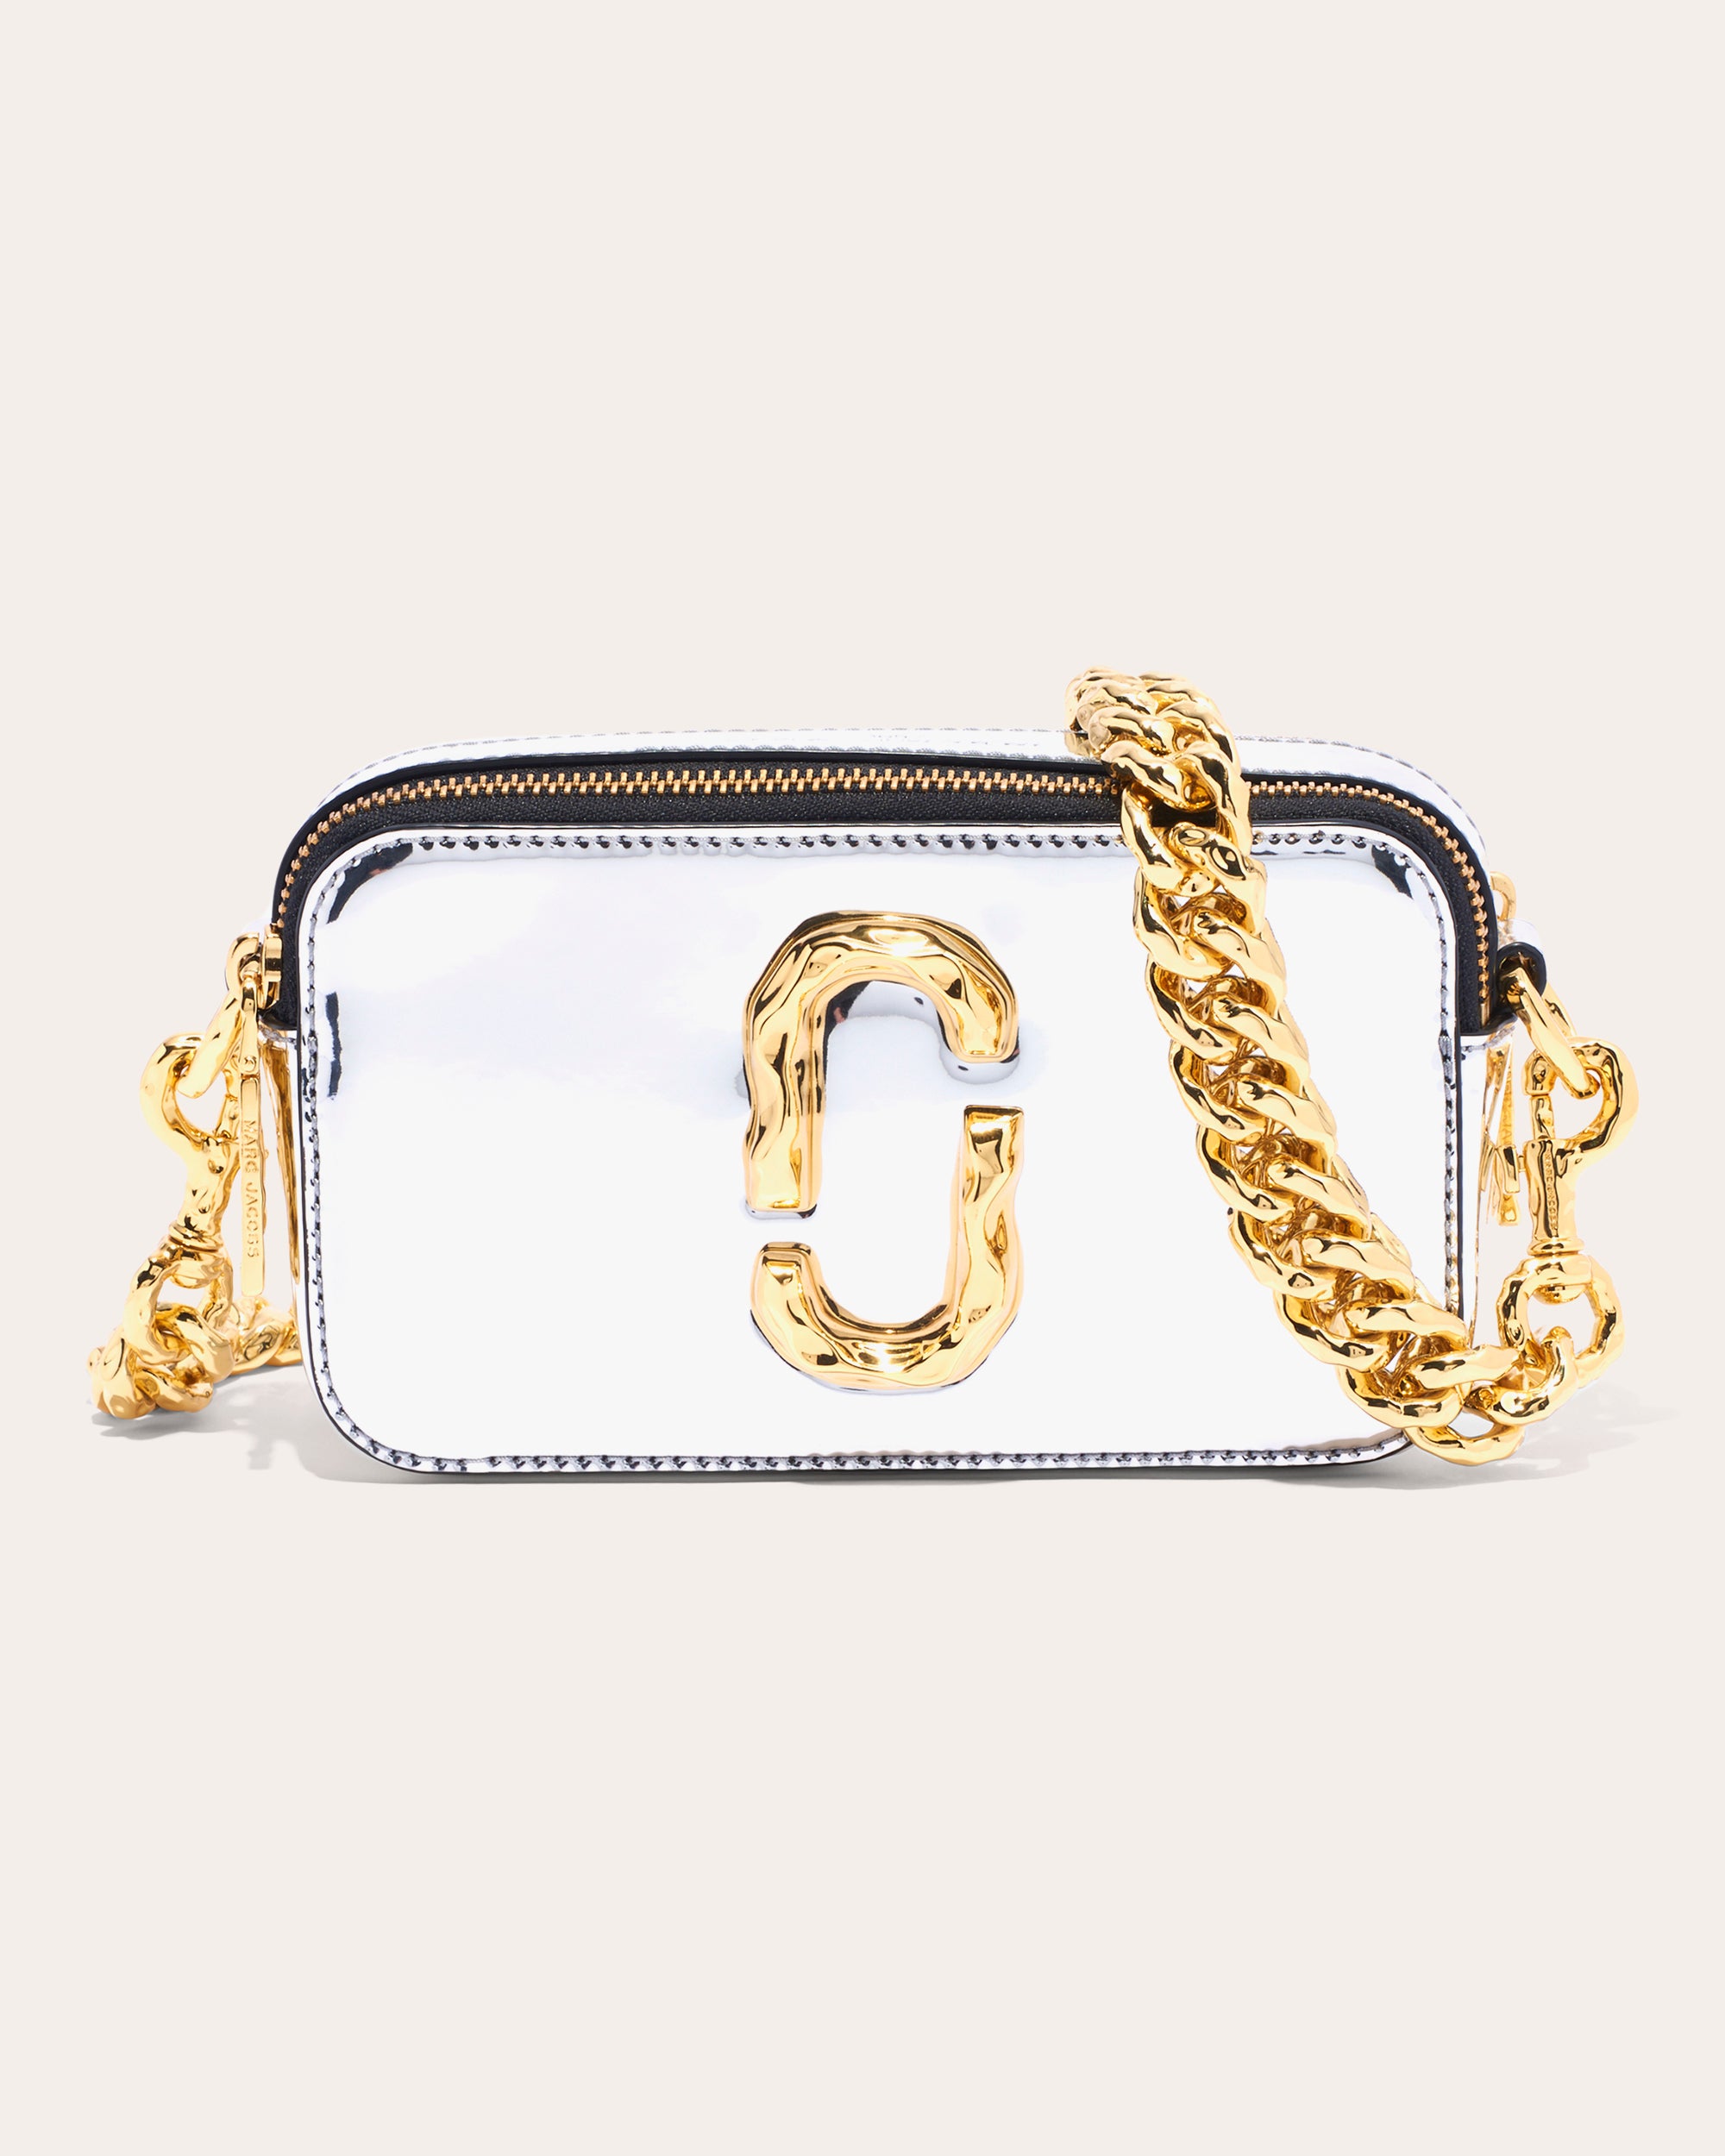 Olivela - SPOTTED: @marcjacobs's iconic snapshot camera bag on the